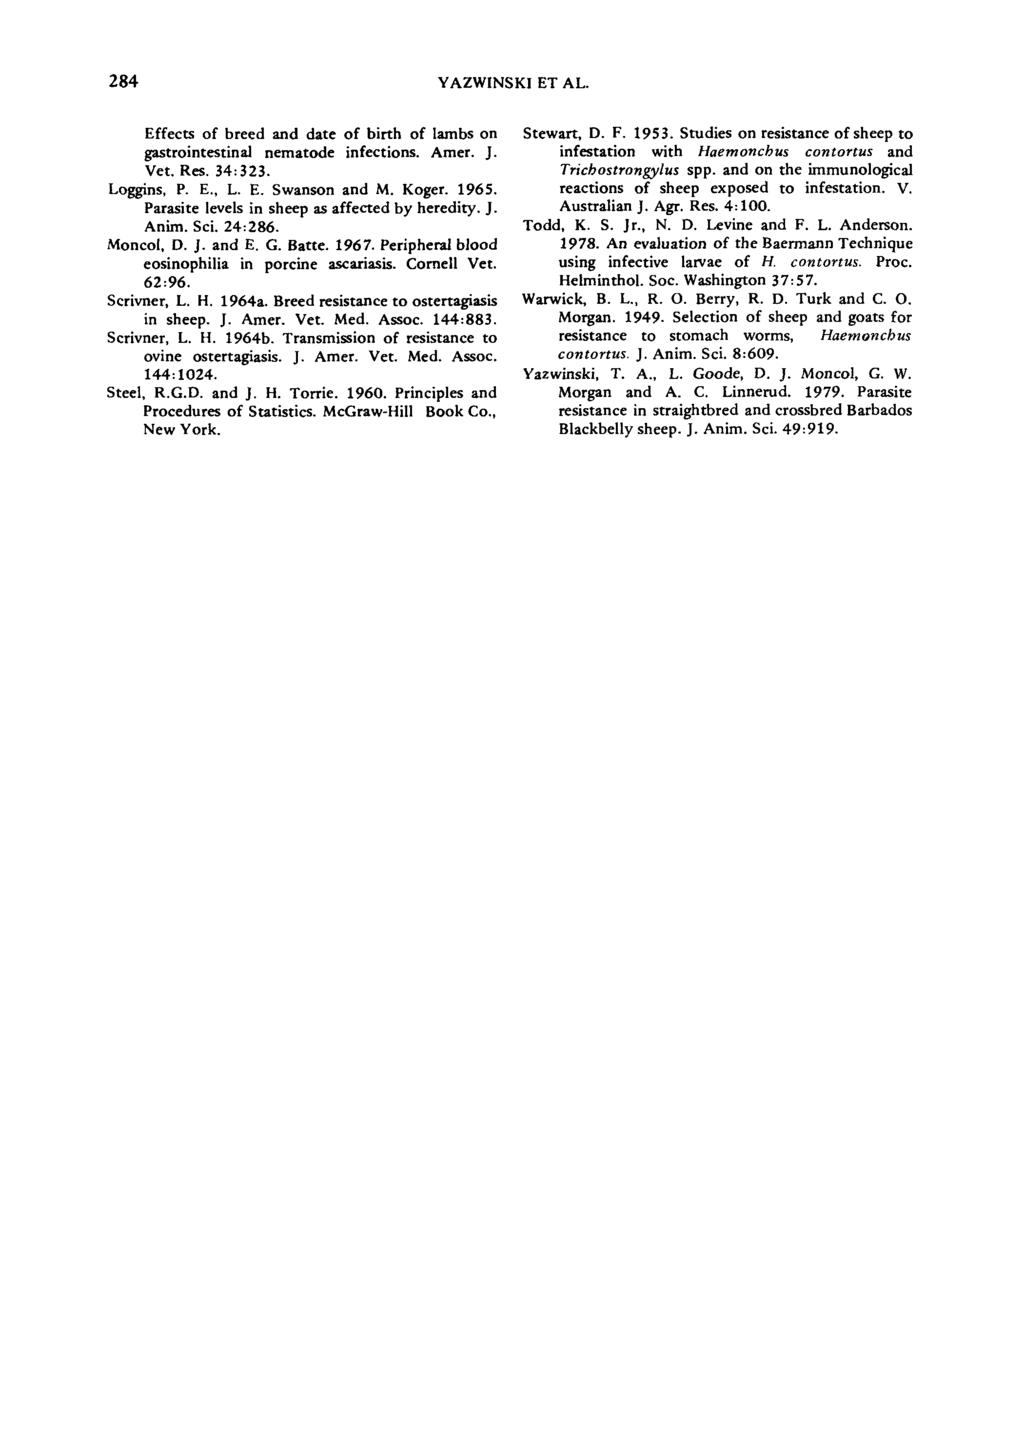 284 YAZWINSKI ET AL. Effects of breed and date of birth of lambs on gastrointestinal nematode infections. Amer. J. Vet. Res. 34:323. Loggins, P. E., L. E. Swanson and M. Koger. 1965.